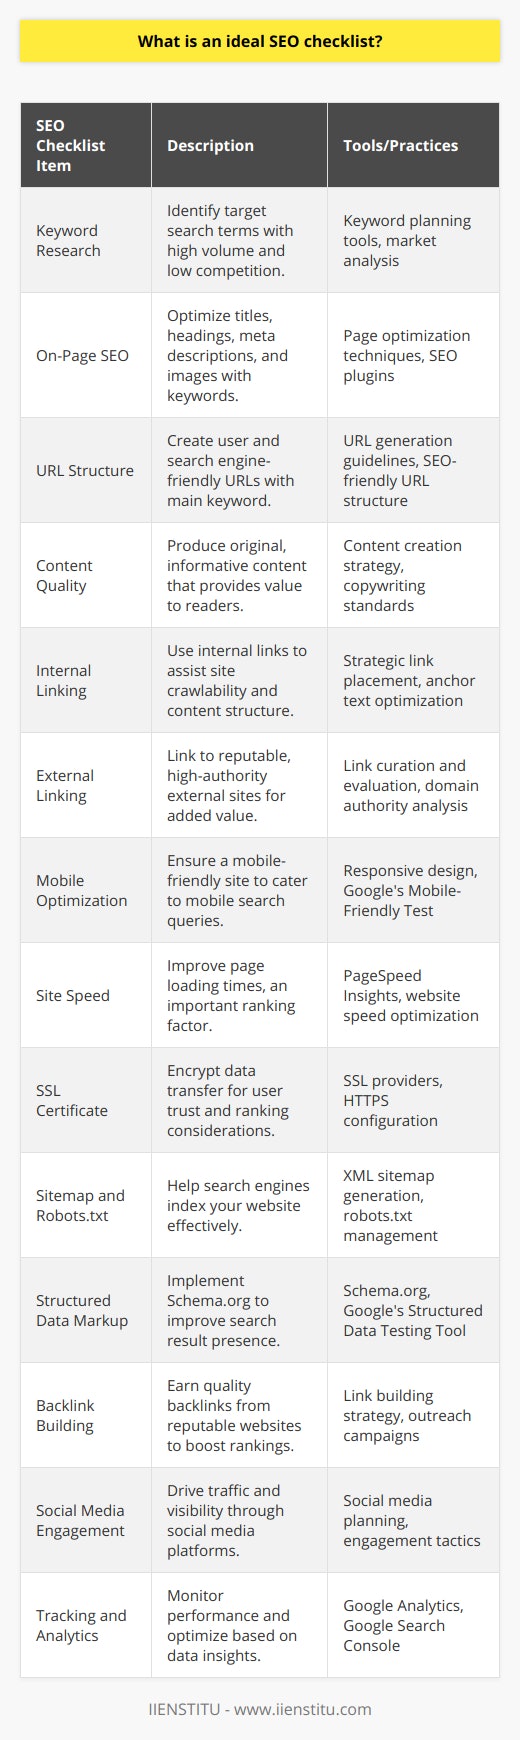 An ideal SEO checklist is essential for improving the visibility and ranking of a website in search engine results pages (SERPs). By adhering to this checklist, developers and SEO specialists can systematically address the various factors that influence a site's search engine performance.1. Keyword Research: Start with thorough keyword research to identify the terms and phrases that your target audience is searching for. Tailor your content to answer these queries and incorporate terms that have high search volumes but low competition to increase your chances of ranking well.2. On-Page SEO: On-page elements include optimizing your titles, headings, meta descriptions, and images. Ensure each page has a unique title that includes the main keyword; your meta description should summarize the page content effectively and motivate users to click through. Use headers (H1, H2, H3, etc.) to structure your content and make it easy to read, and ensure that all images have descriptive alt text.3. URL Structure: Create clean, descriptive URLs that include your main keyword. A well-structured URL provides both users and search engines with an easy-to-understand indication of what the destination page is about.4. Content Quality: Quality content is pivotal for keeping visitors engaged and encouraging them to share your page, which can lead to natural backlinks. Ensure your content is original, informative, and provides value to readers.5. Internal Linking: Use internal linking to help search engines crawl your site and understand the structure of your content. This can also guide visitors to more relevant content, increasing the time they spend on your site.6. External Linking: Include external links to reputable, high-authority sites to provide additional value to your readers and help search engines understand your niche and the relevancy of your content.7. Mobile Optimization: With the majority of searches now taking place on mobile devices, ensure your site is mobile-friendly. Google's Mobile-Friendly Test can help you see if your page meets this requirement.8. Site Speed: Page loading times are a ranking factor for Google. Use tools like Google's PageSpeed Insights to analyze and improve the speed of your website.9. SSL Certificate: Implementing an SSL certificate secures your site by encrypting data transfer, a factor that's not only crucial for user trust but also for Google's ranking consideration.10. Sitemap and Robots.txt: Create an XML sitemap to help search engines index your website more effectively. The robots.txt file advises search engines which parts of your site should or should not be indexed.11. Structured Data Markup: Utilize structured data (Schema.org markup) to help search engines understand the content on your pages and provide rich snippets in search results, which can improve click-through rates.12. Backlink Building: Establish a strategy for earning high-quality backlinks from authoritative websites, as this is a significant factor in search rankings.13. Social Media Engagement: A presence on social media can drive traffic to your website and improve your site's visibility.14. Tracking and Analytics: Utilize tools like Google Analytics and Google Search Console to monitor your site's performance, track traffic sources, and identify areas that need improvement.Following this SEO checklist can significantly benefit the optimization process, increasing your site's ranking potential and attracting more organic traffic. IIENSTITU, through its SEO and digital marketing courses, emphasizes the importance of a comprehensive and continually updated SEO checklist, recognizing that the practices and techniques of SEO are ever-evolving.